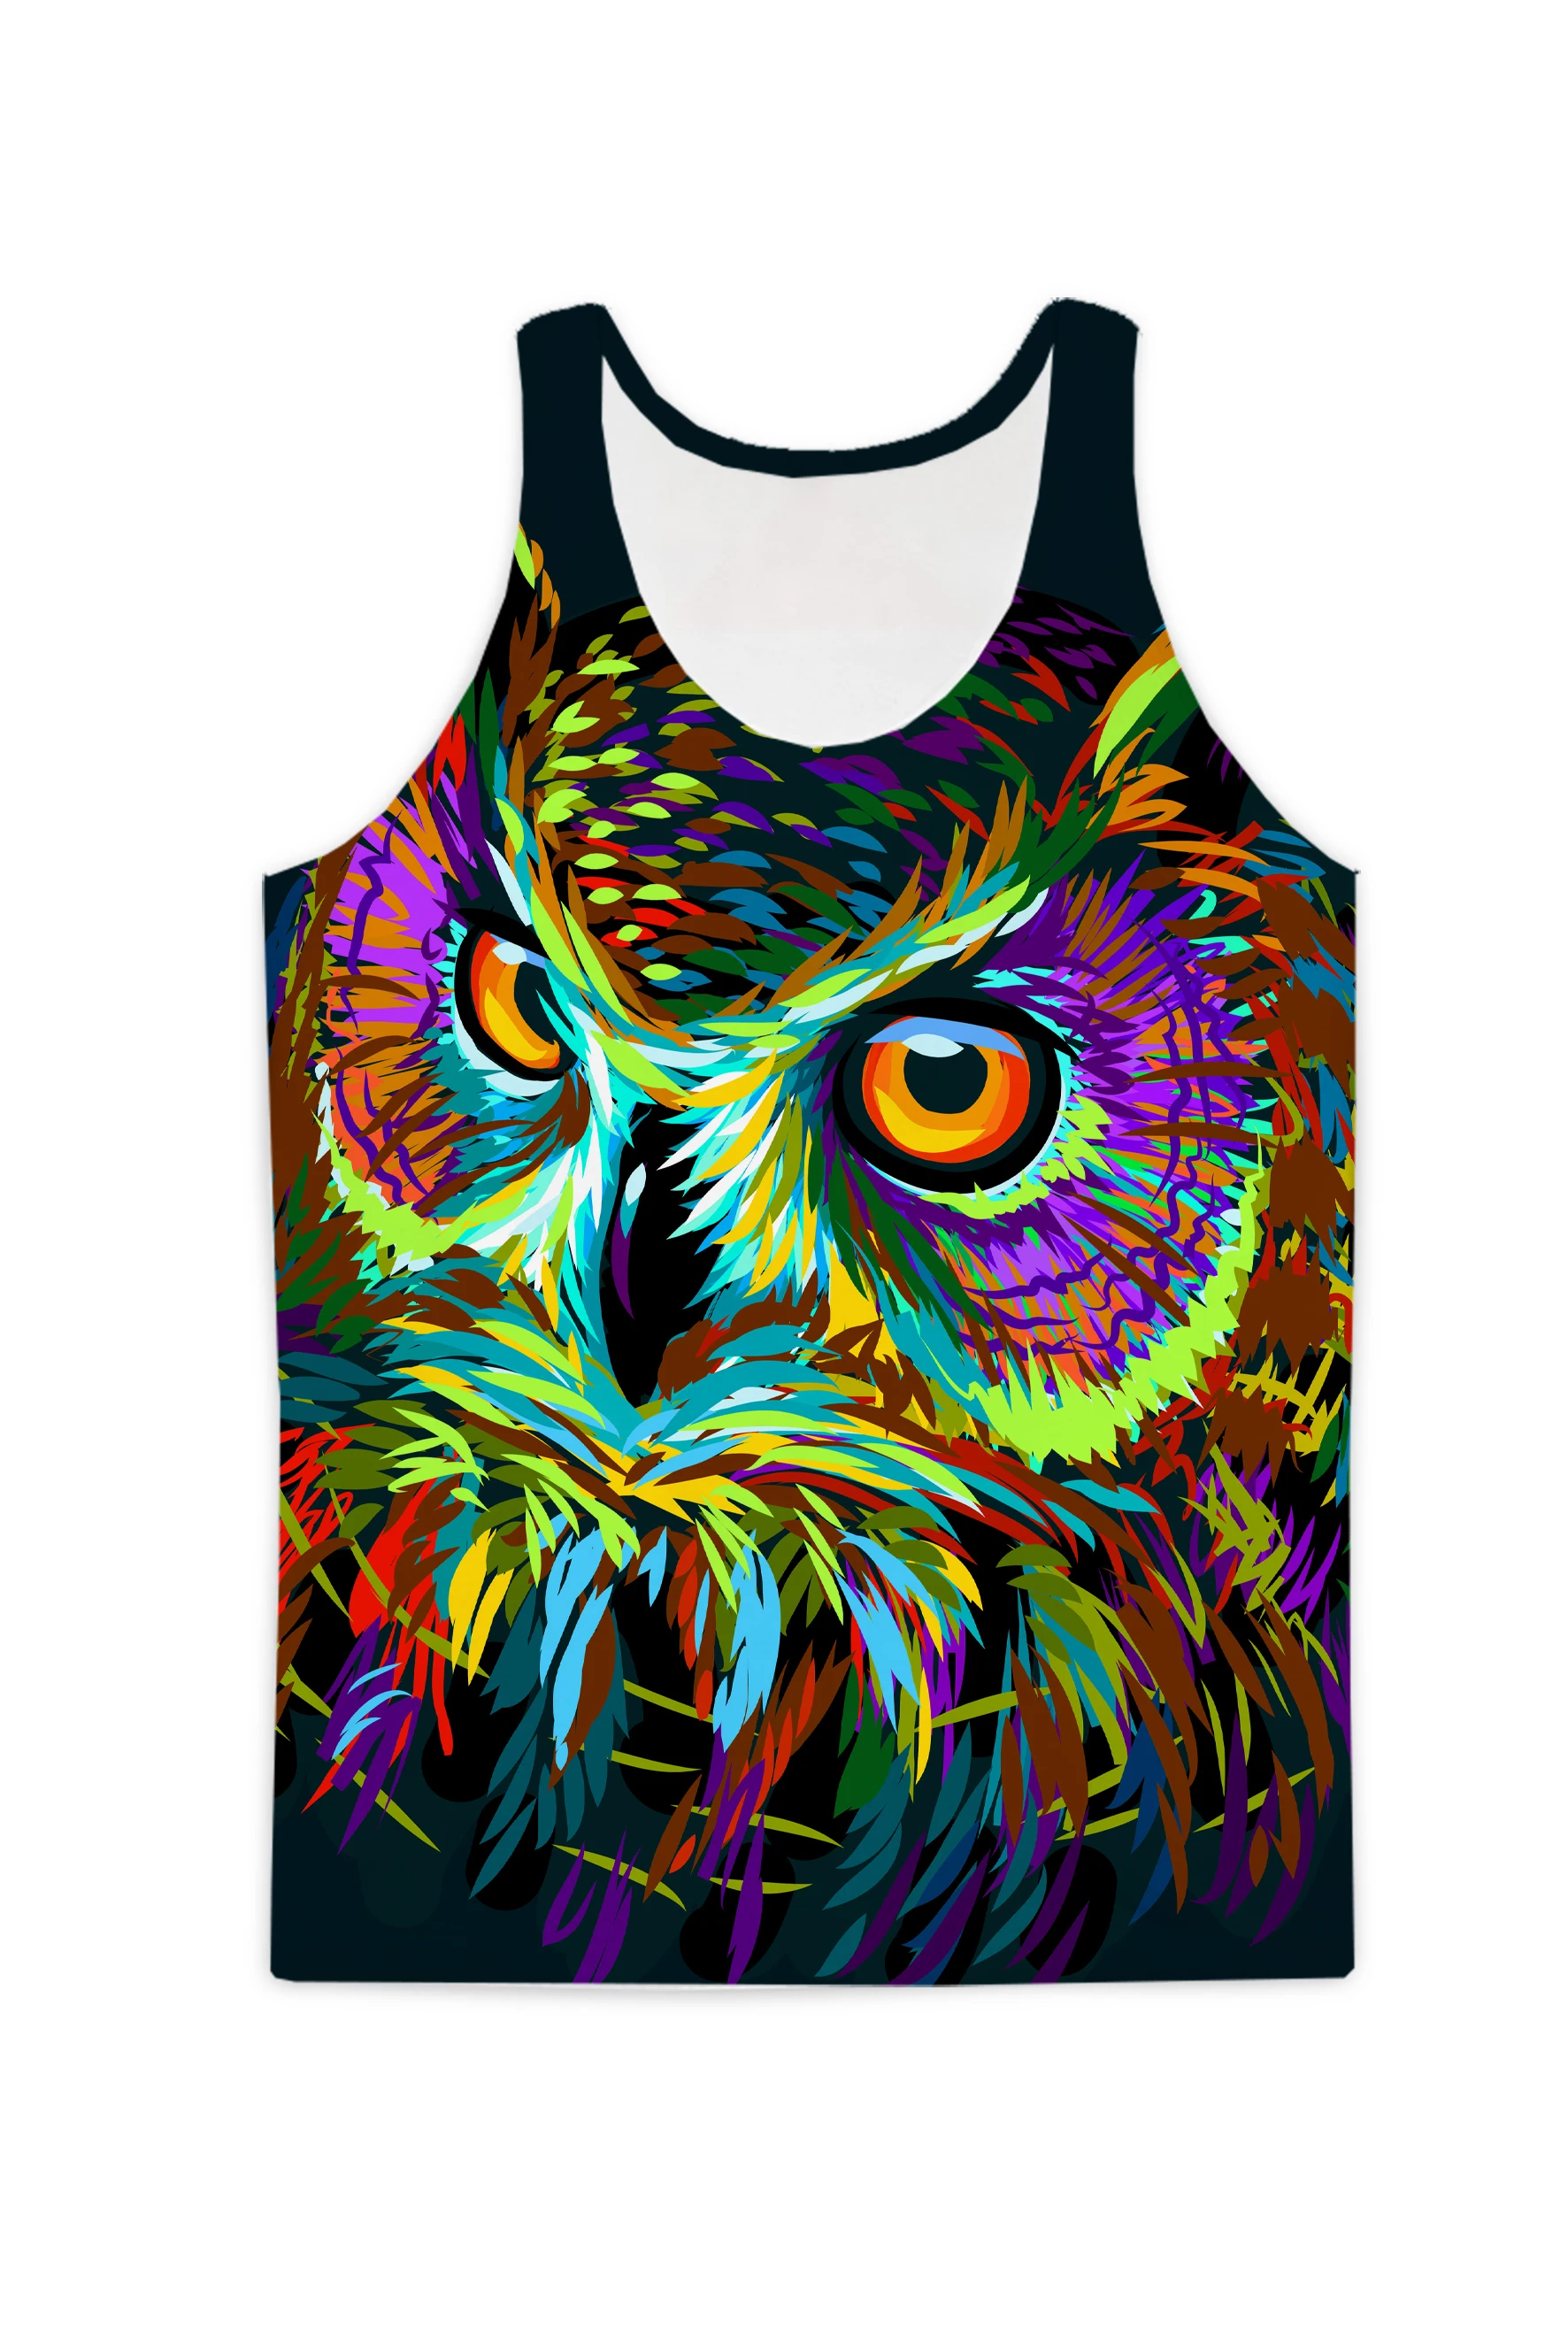 REAL American SIZE Colorful Owl  Sublimation Print Tank Top